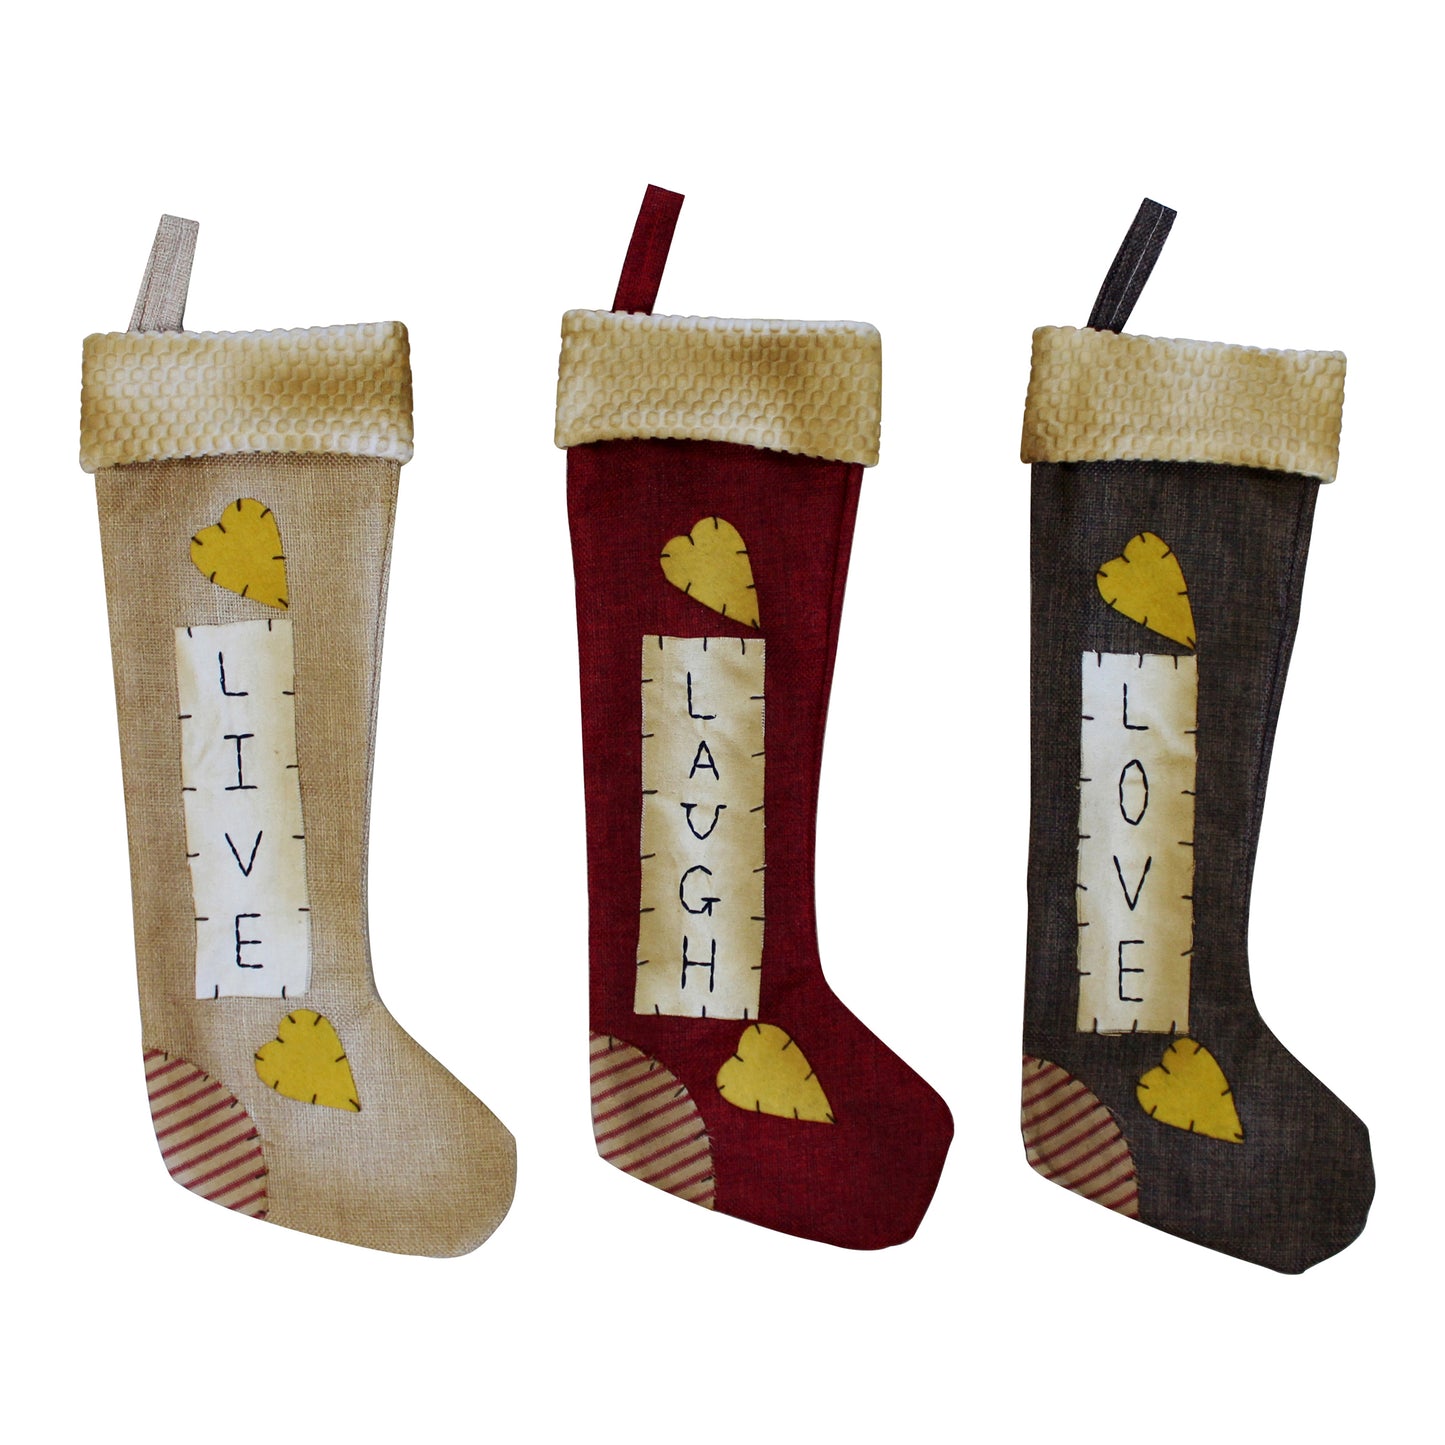 CVHOMEDECO. Primitive Rustic 16 Inch Hanging Stockings with Stitched Messages Live Laugh Love for Christmas or Home Décor. 3 Assorted